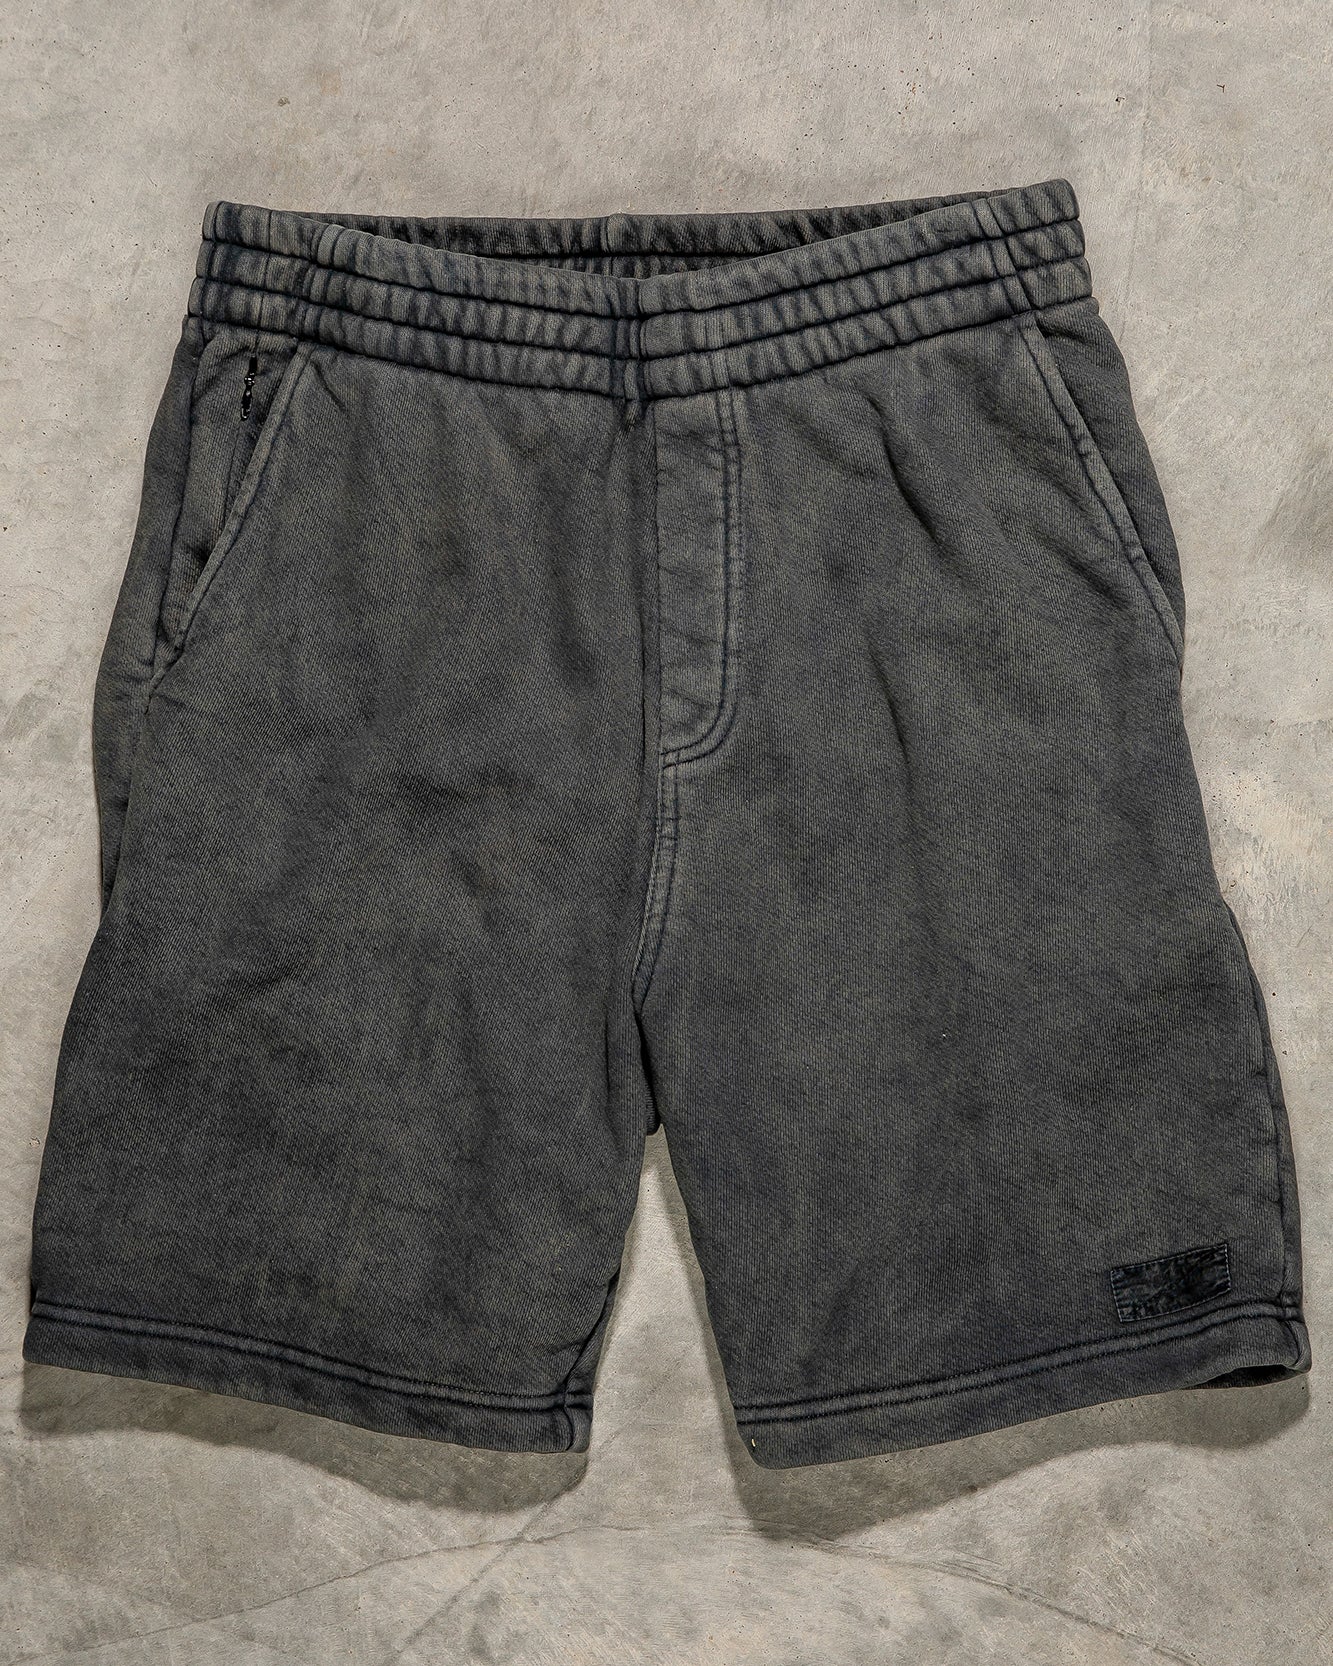 Devium USA Fleetwood French Terry Sweatshort posted by ProdOrigin USA in Men's Apparel